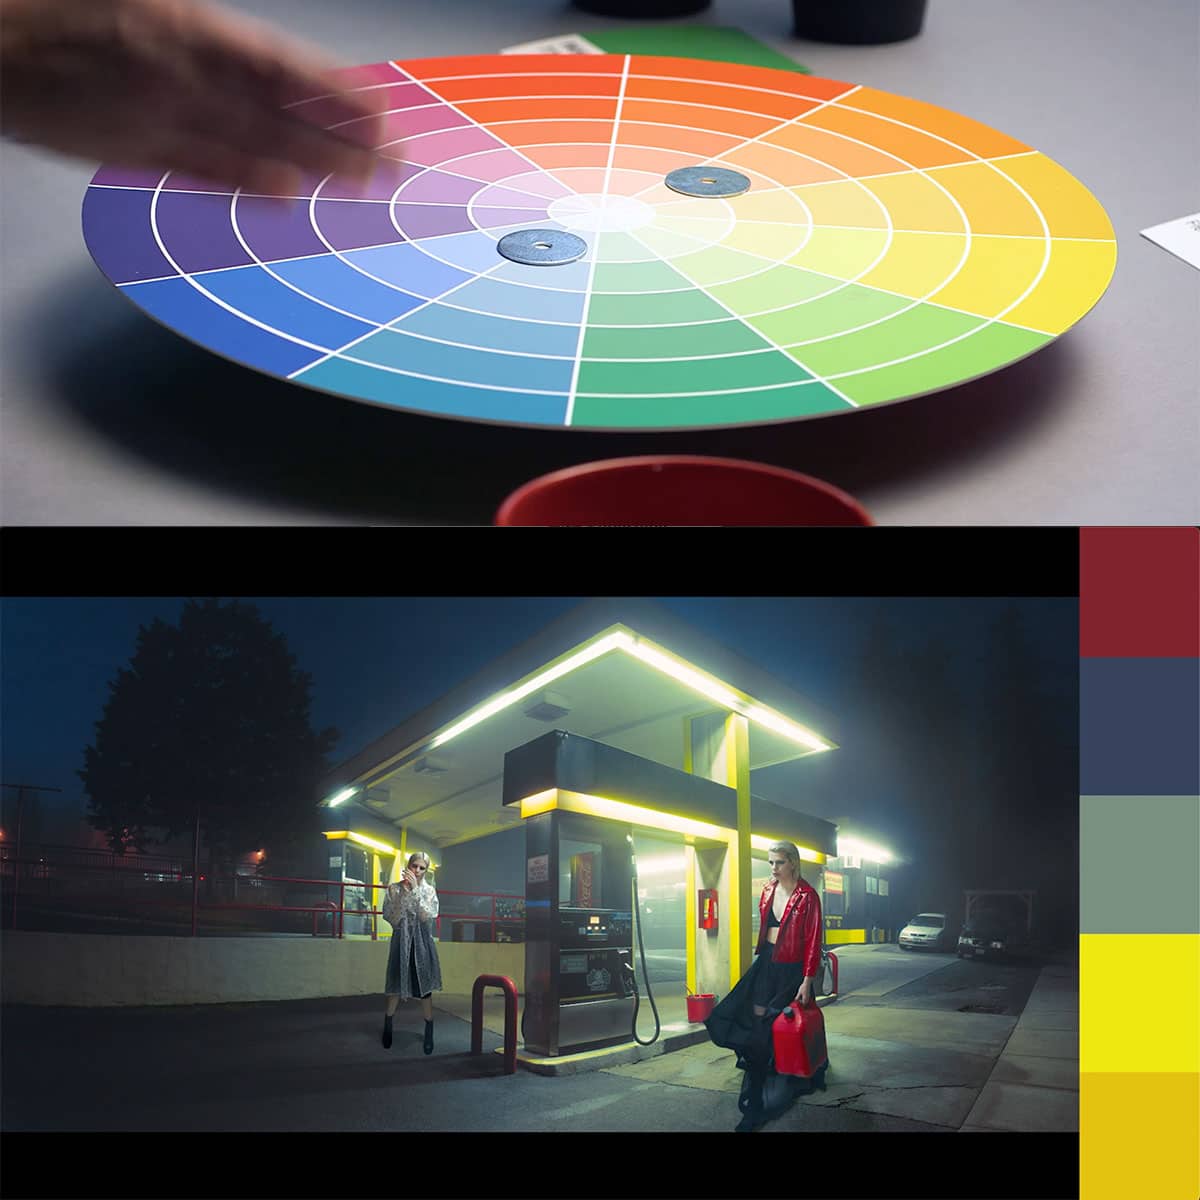 Color Theory For Photography Tutorial with Kate Woodman - PRO EDU Kate Woodman PRO EDU